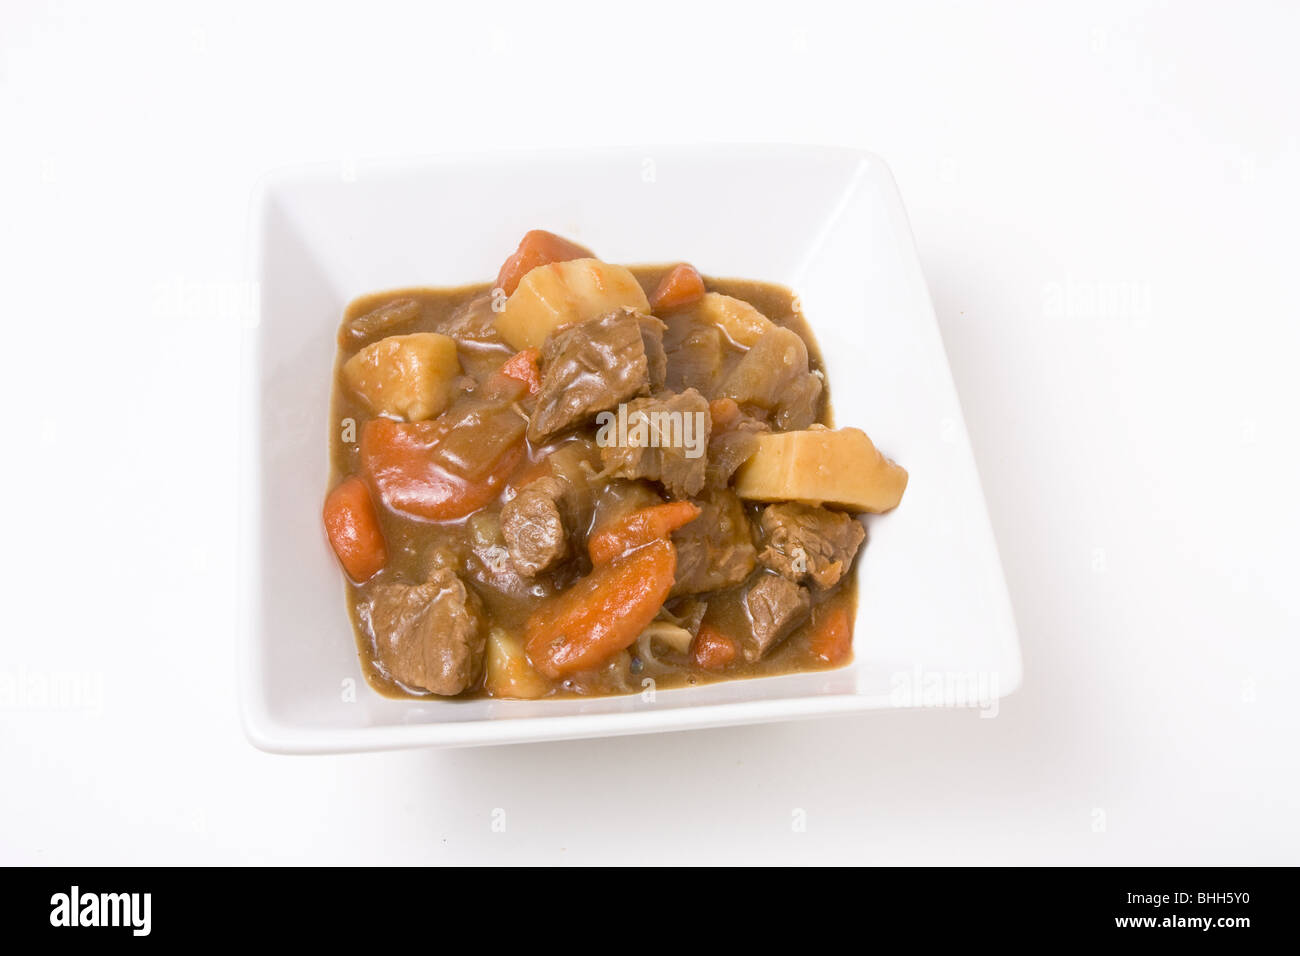 Beef stew or Goulash in white bowl isolated against white background. Stock Photo